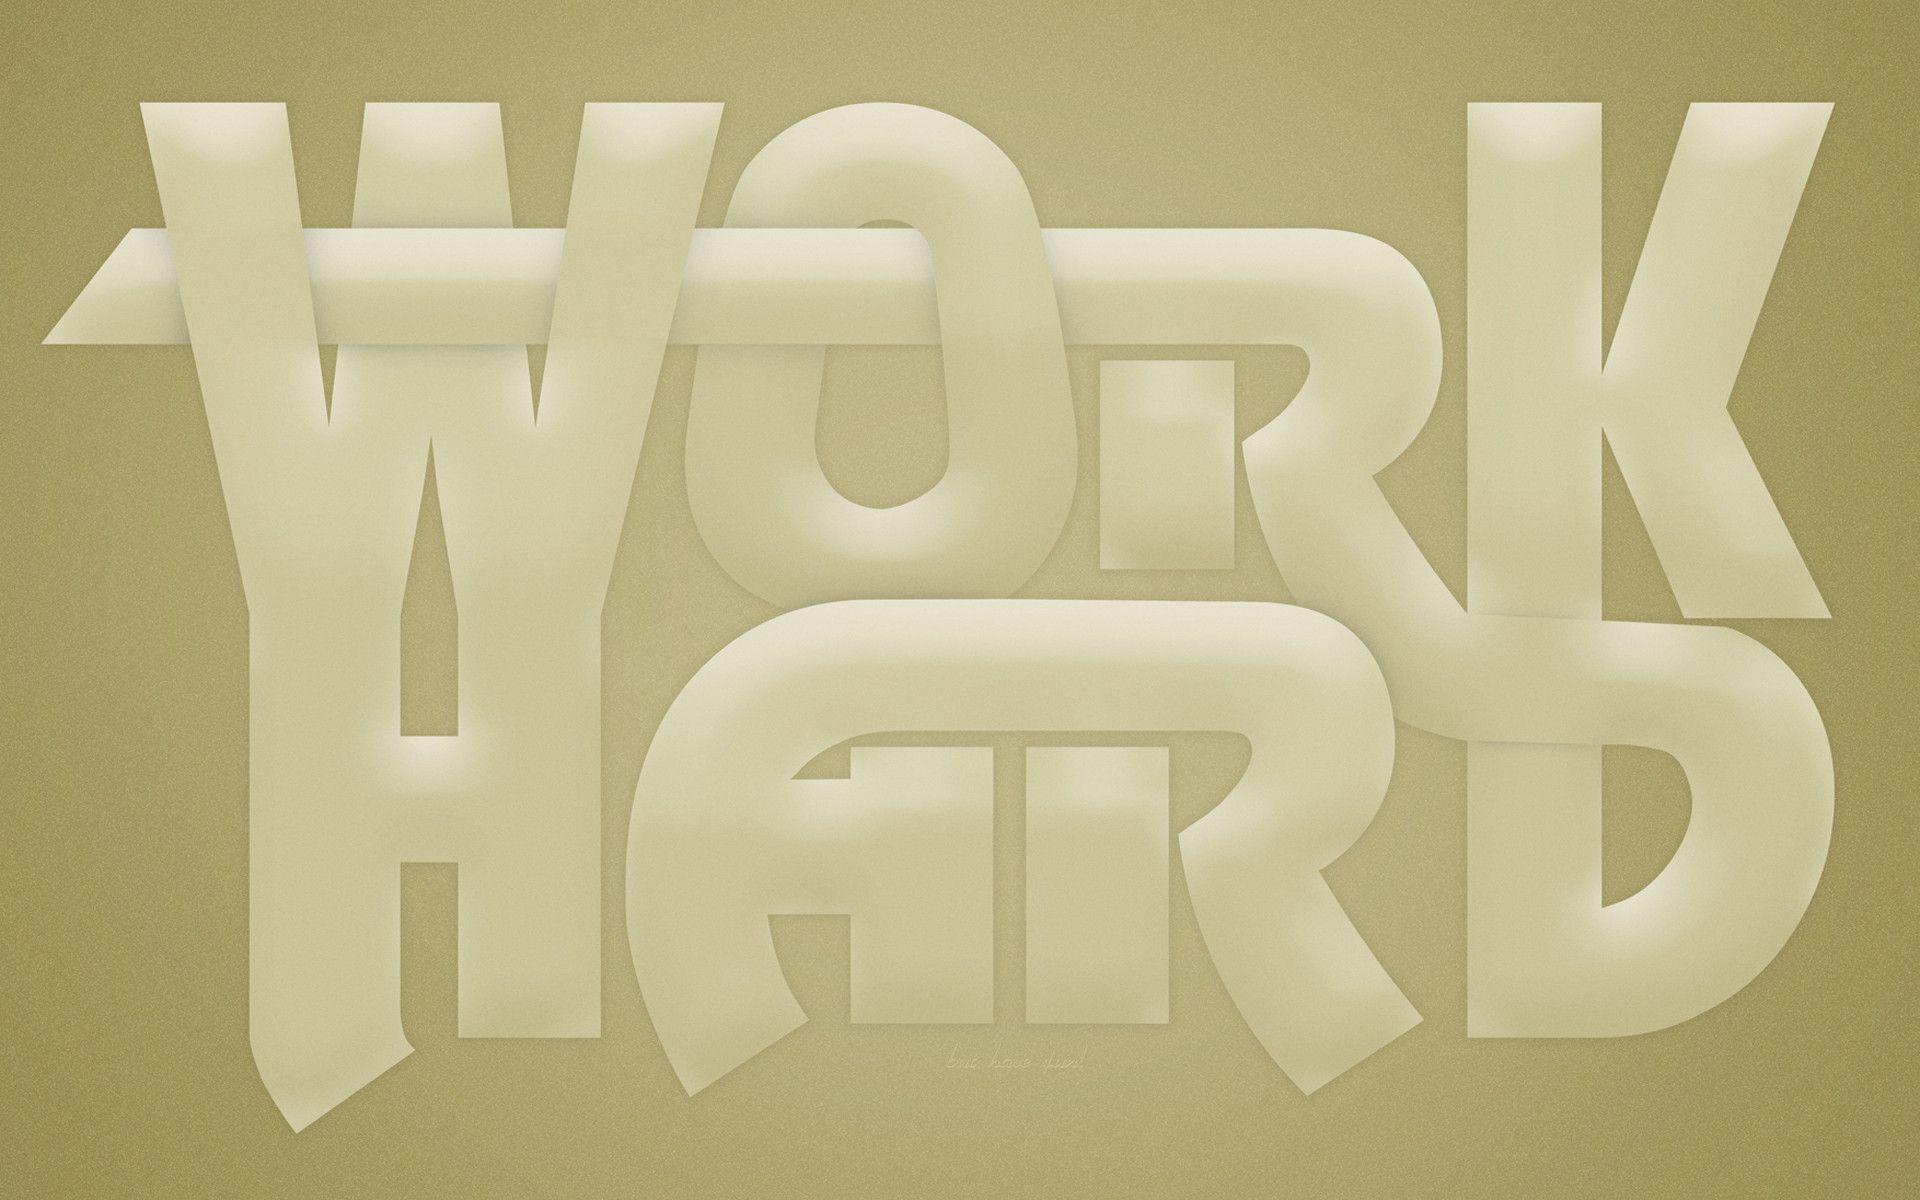 Forrst. Work Hard have fun wallpaper link from Dragos_M